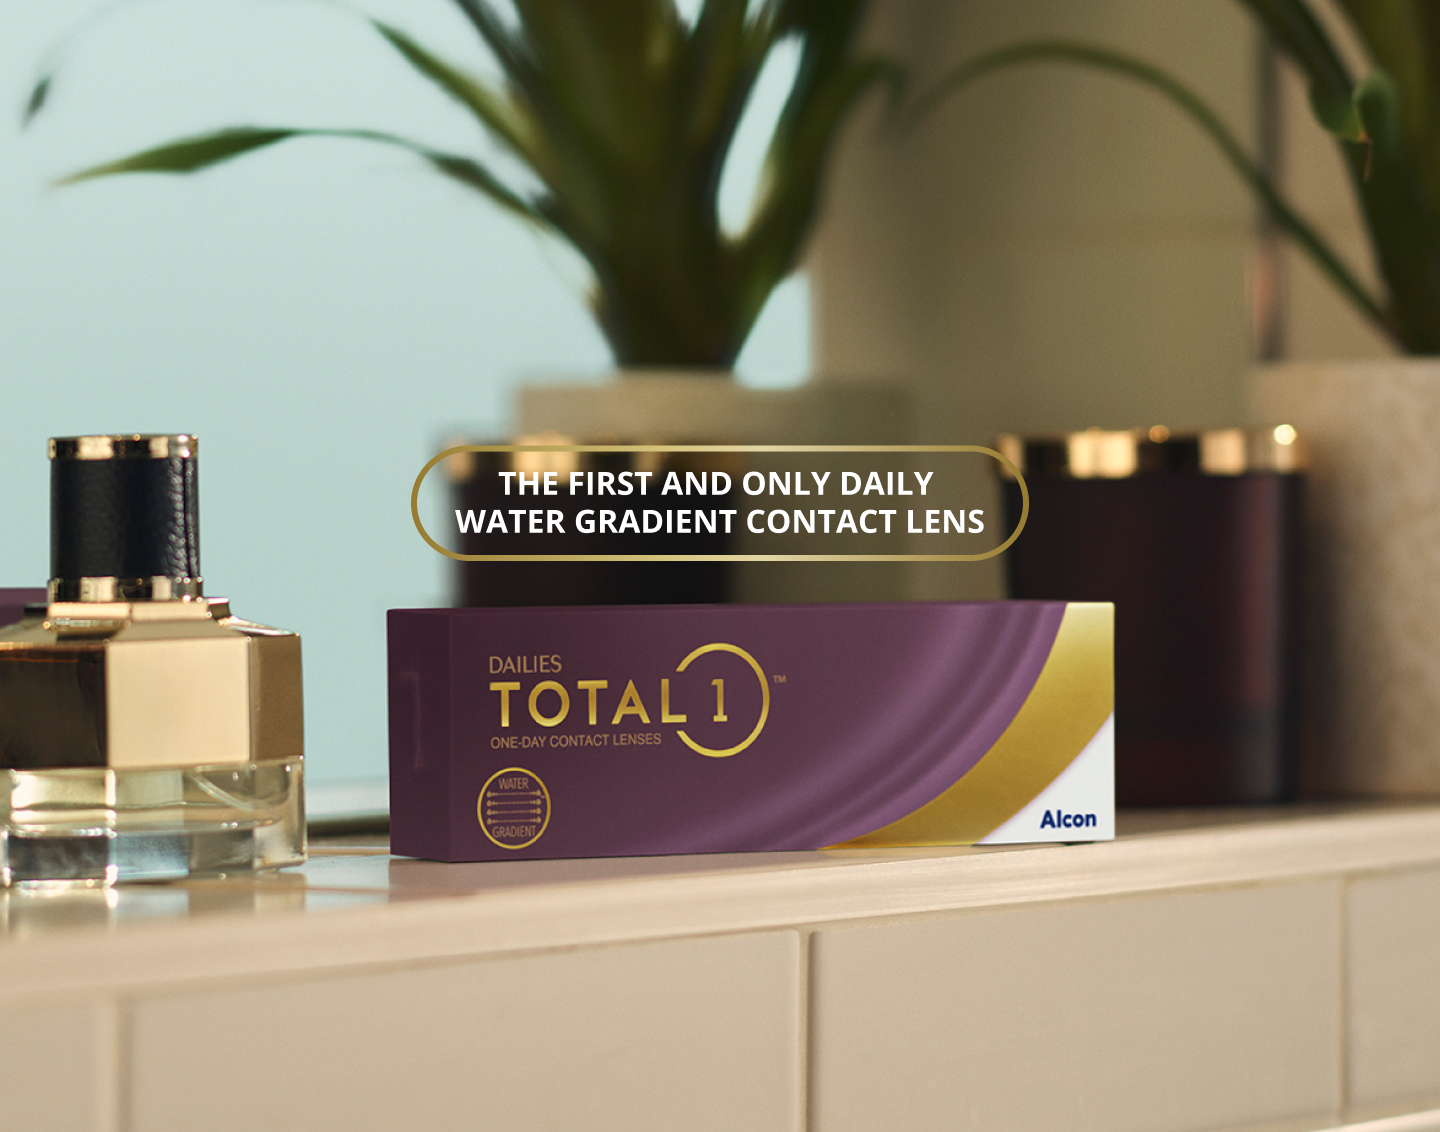 Dailies Total1 UK product box on counter, the first and only daily Water Gradient contact lens